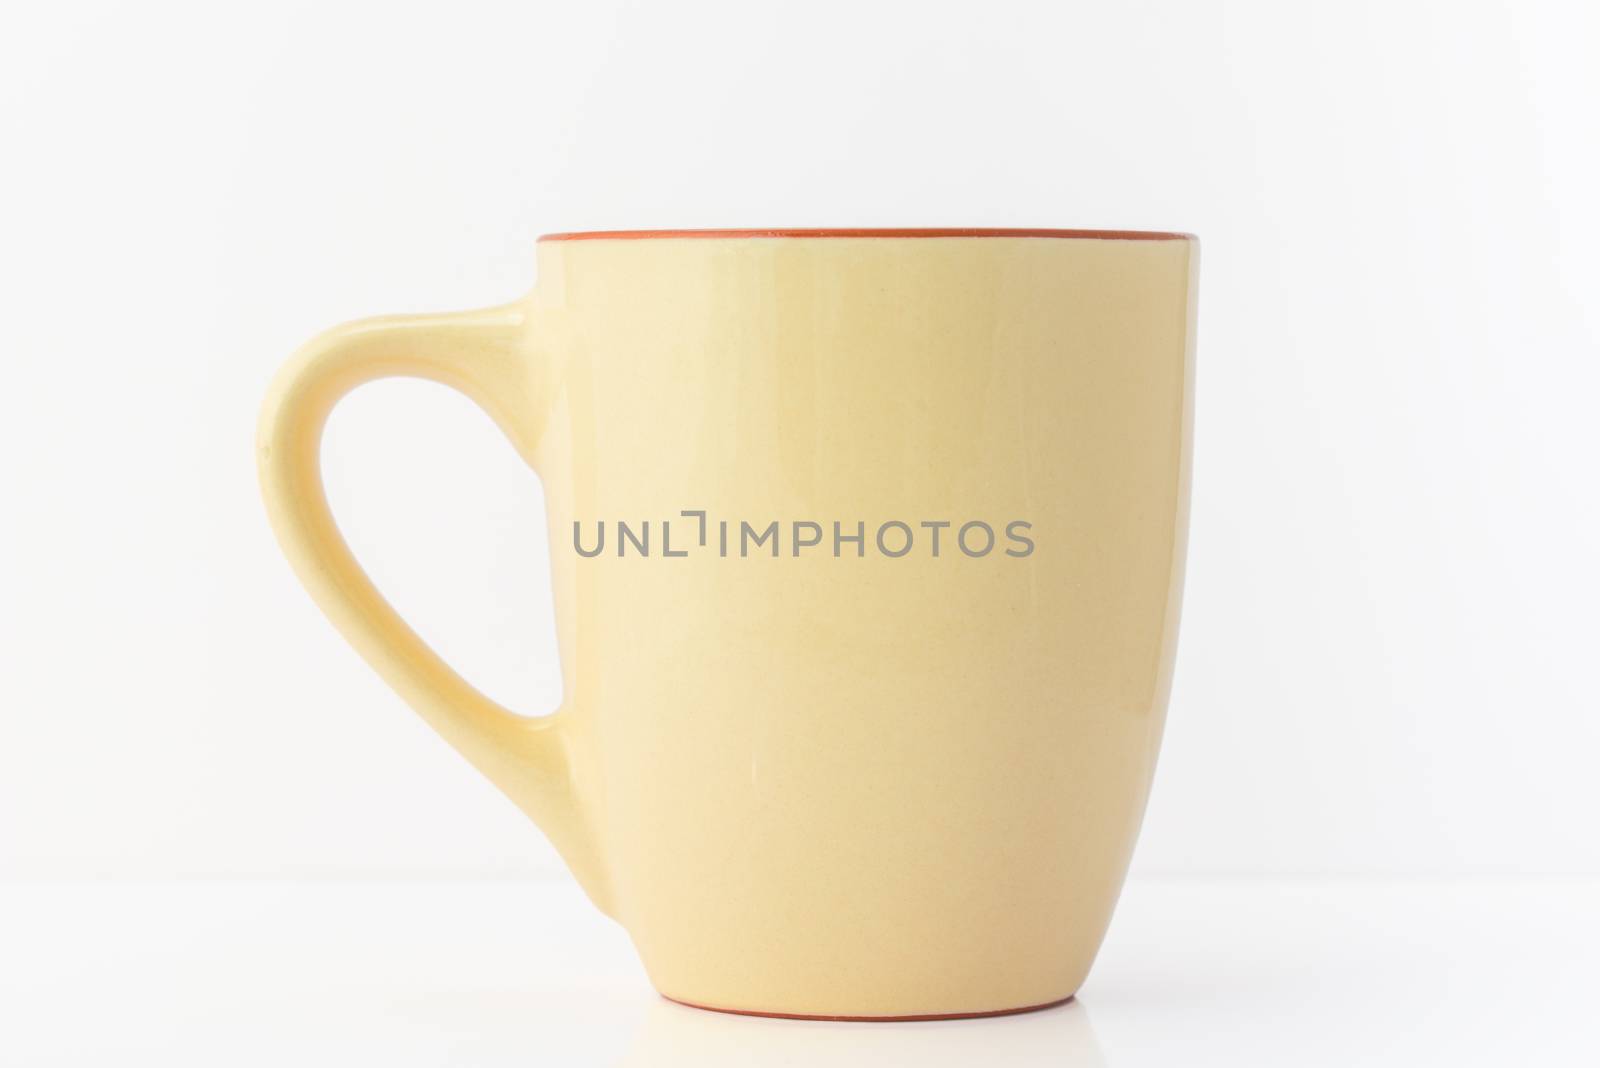 Mug on white background by Visual-Content